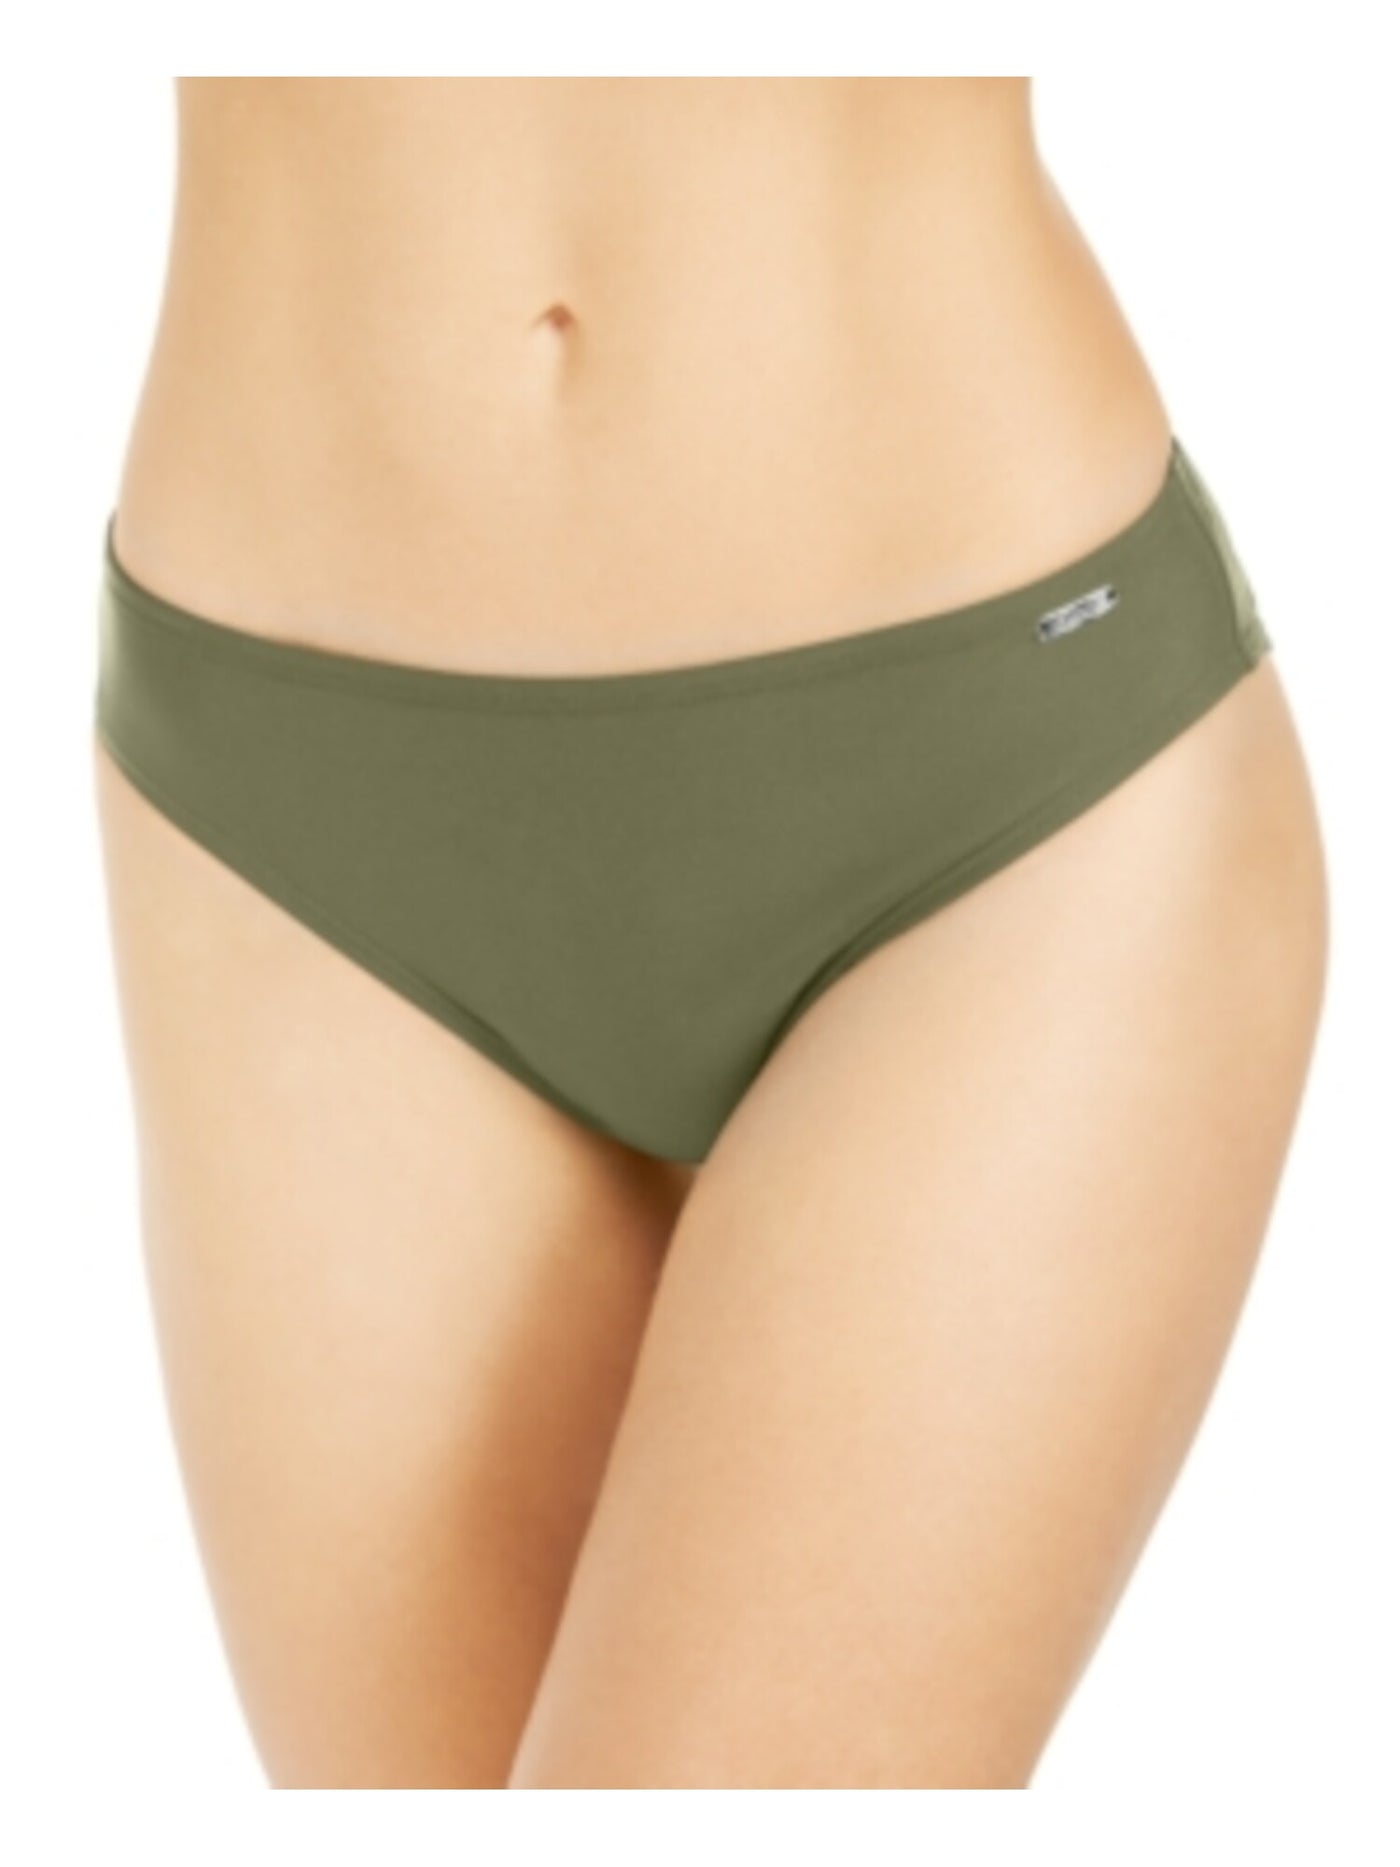 DKNY Women's Green Stretch Lined Full Coverage UV Protection Hipster Swimsuit Bottom XL